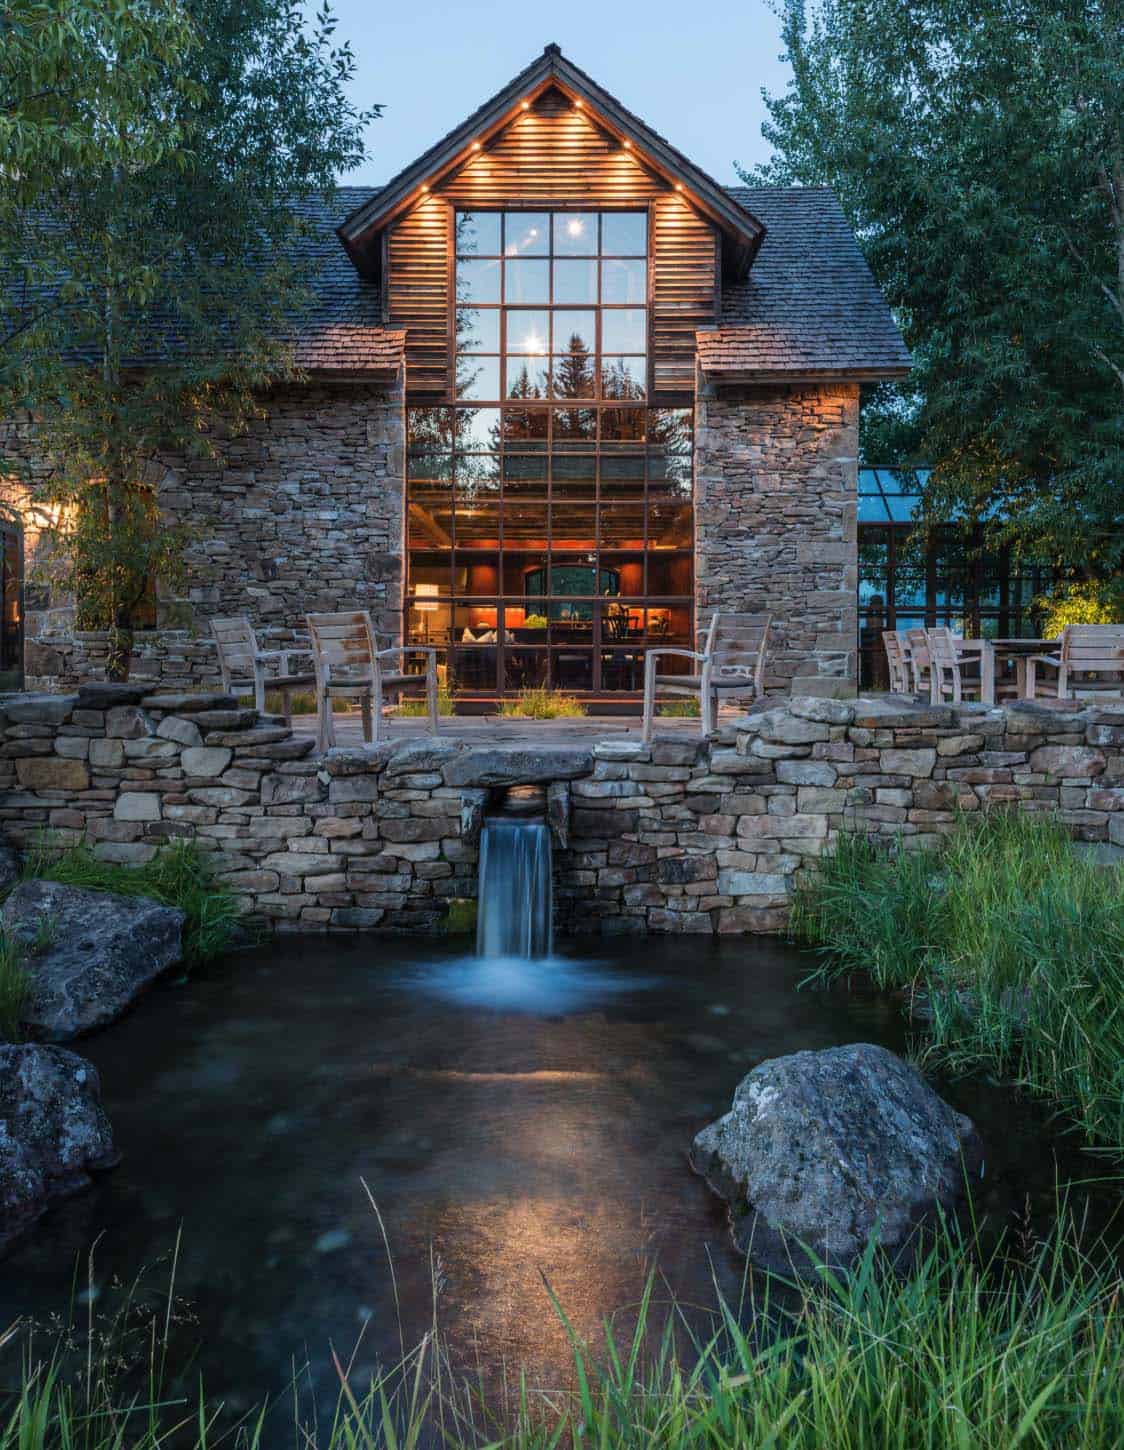 Rustic stone and timber dwelling overlooking the Grand Tetons